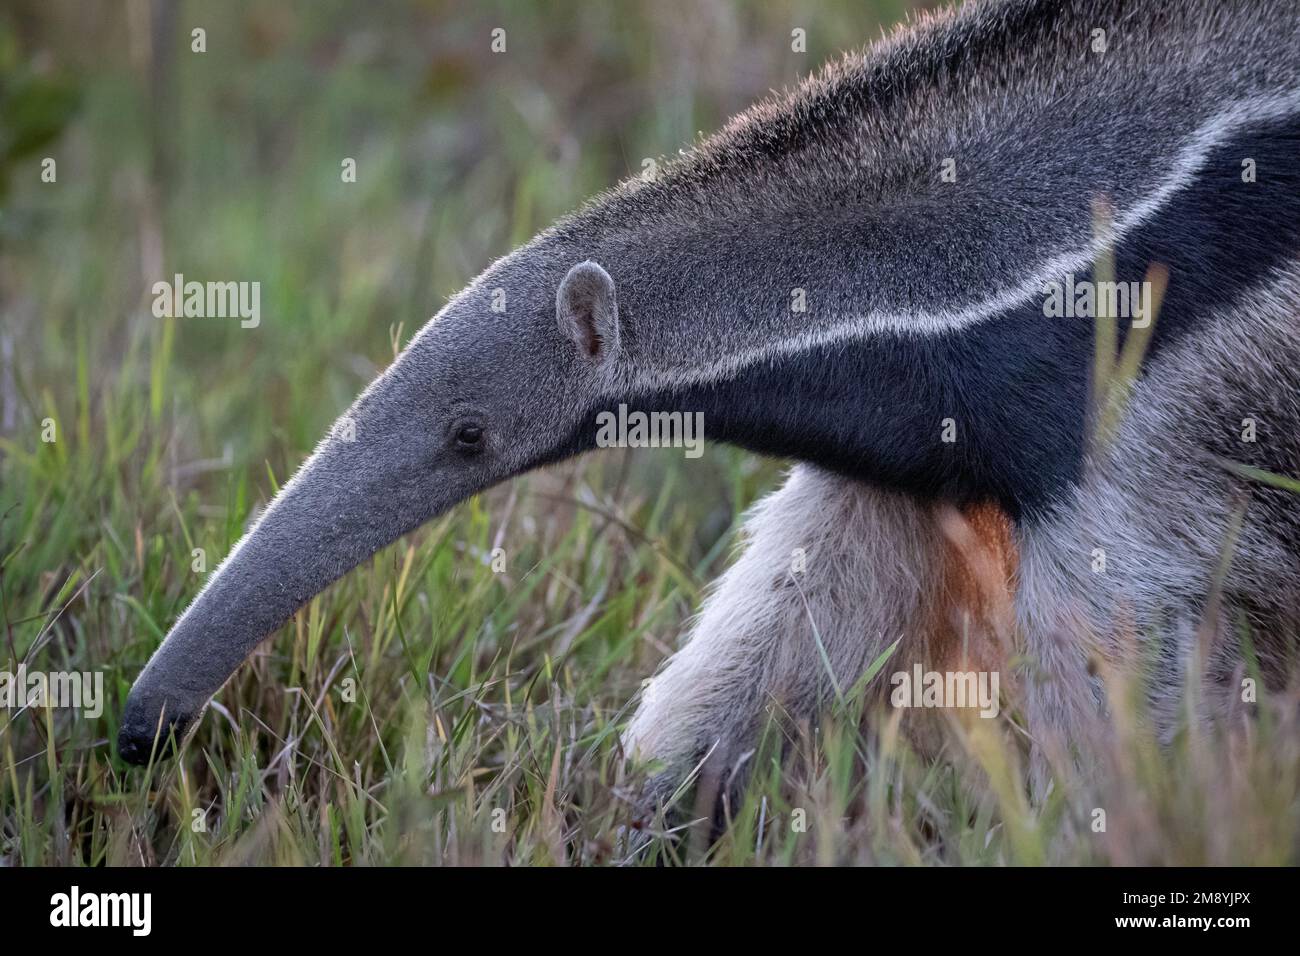 Portrait of a giant anteater (Myrmecophaga tridactyla) foraging through the grasslands of the Pantanal in Brazil during dry season. Stock Photo